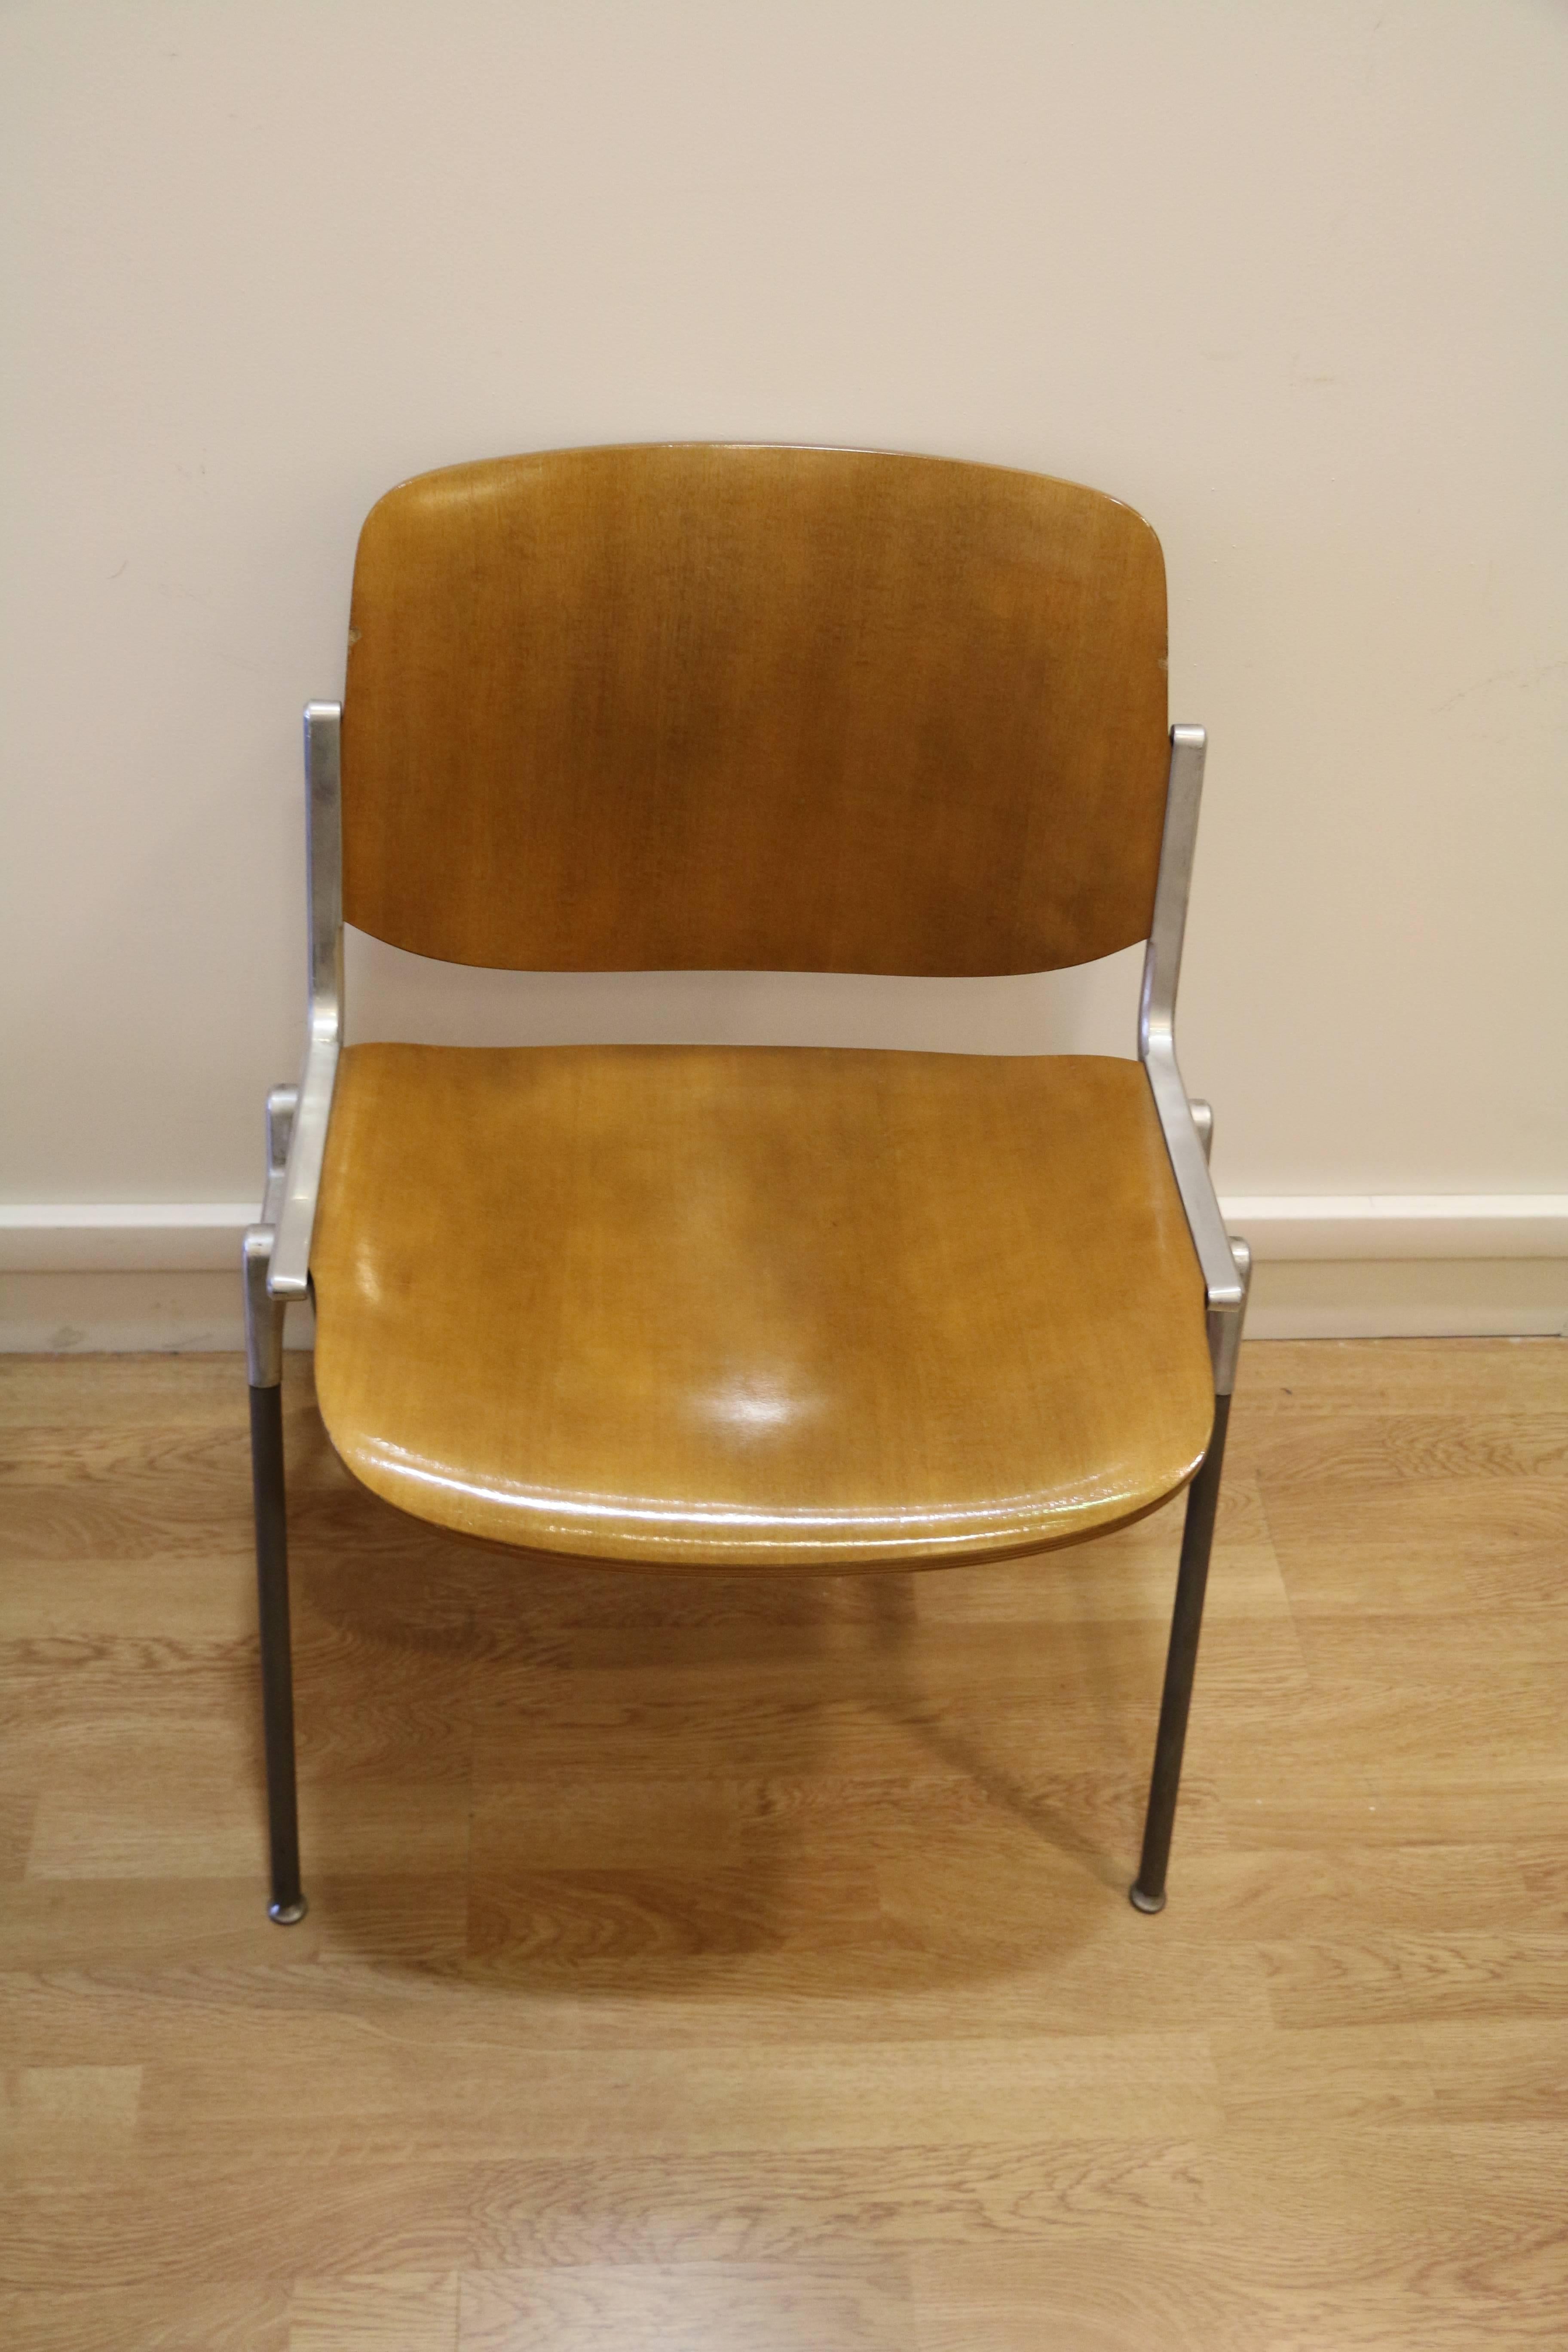 Set of six chairs by Giancarlo Piretti, Model Nr 106 designed in 1967, Italy, Castelli edition. This model is no longer manufactured. 
Chair back and chair seat made of thermoformed/molded plywood. Veneer has been restored, Very nice light honey